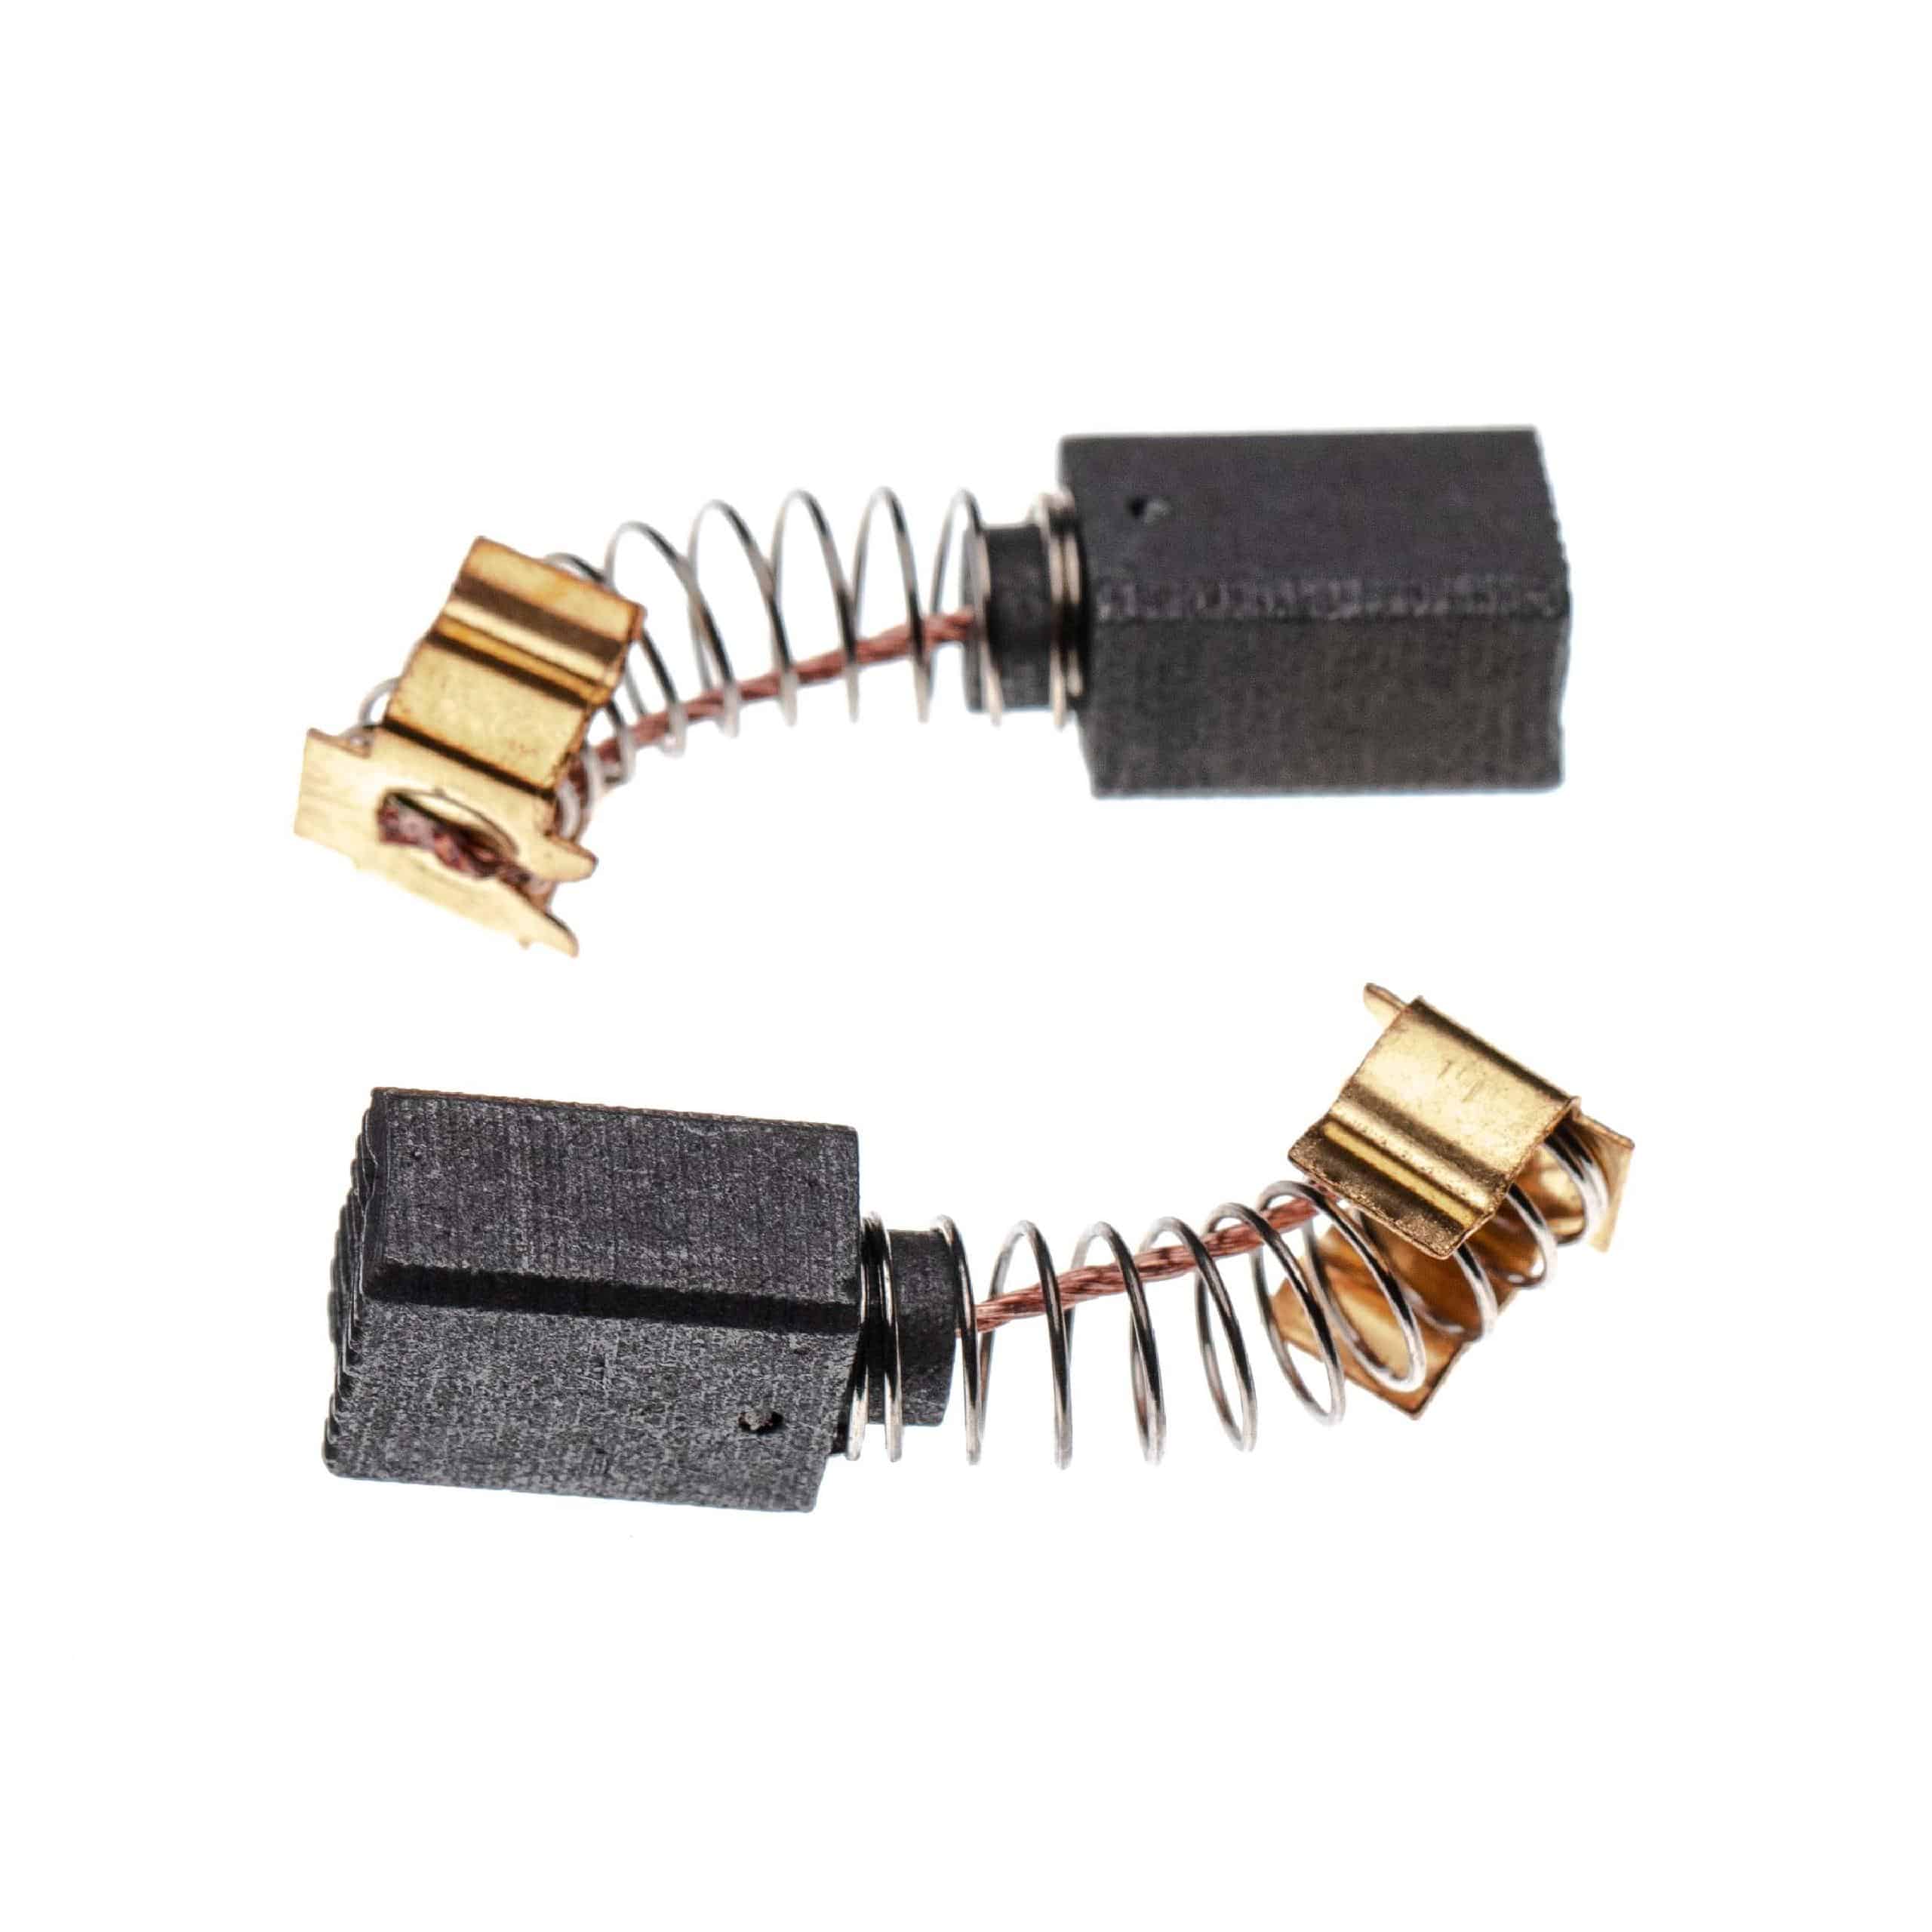 2x Carbon Brush as Replacement for Makita 191962-4, CB-419 Electric Power Tools + Spring, 6 x 9 x 12mm